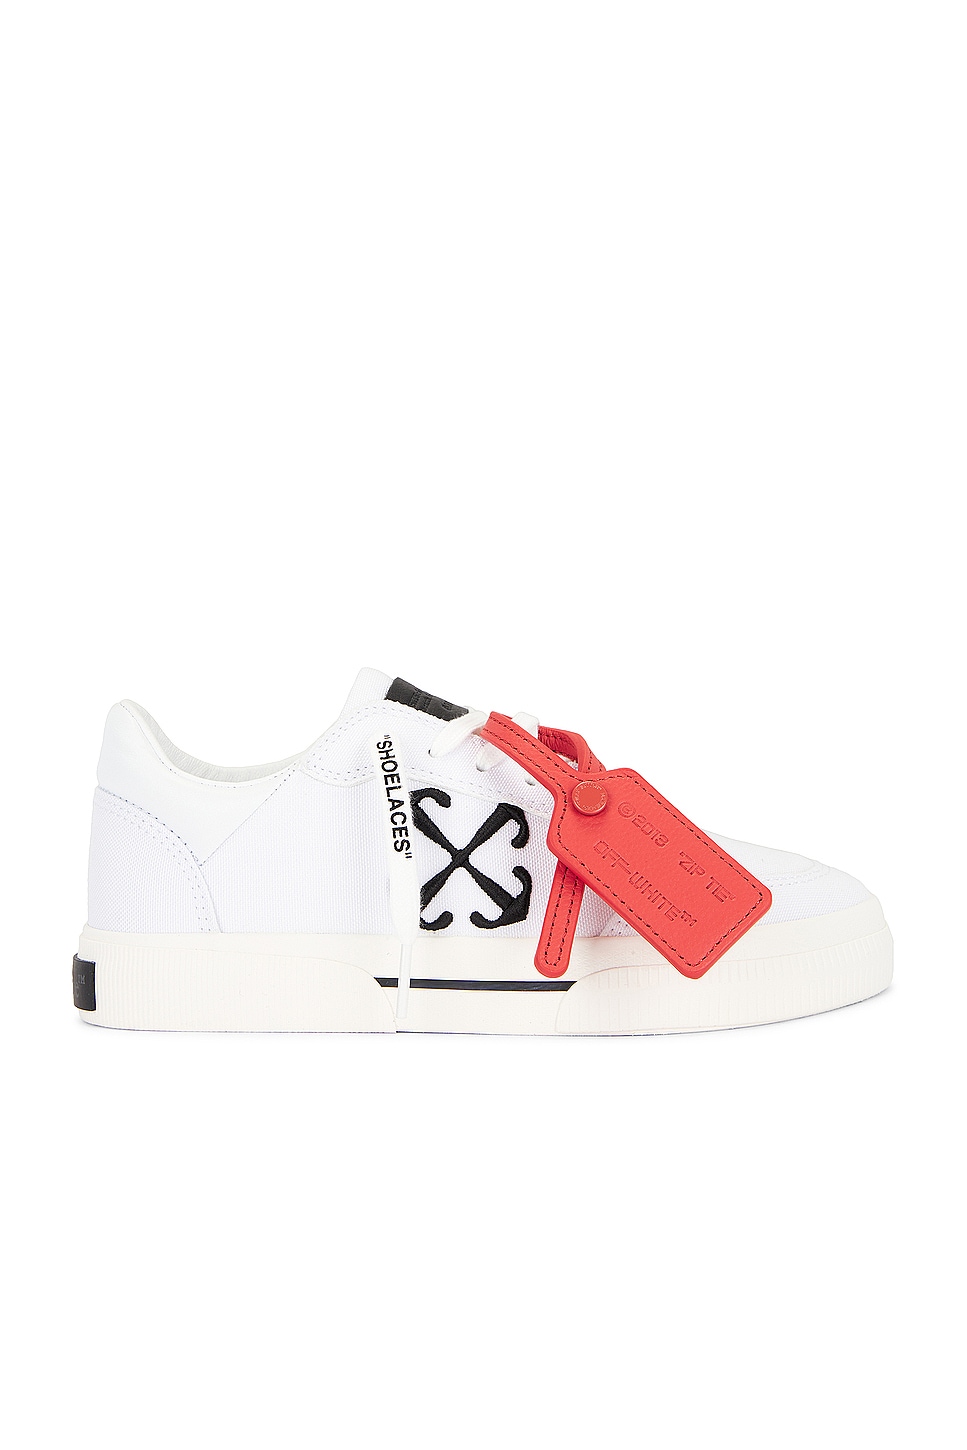 OFF-WHITE New Low Vulcanized Canvas Sneaker in White